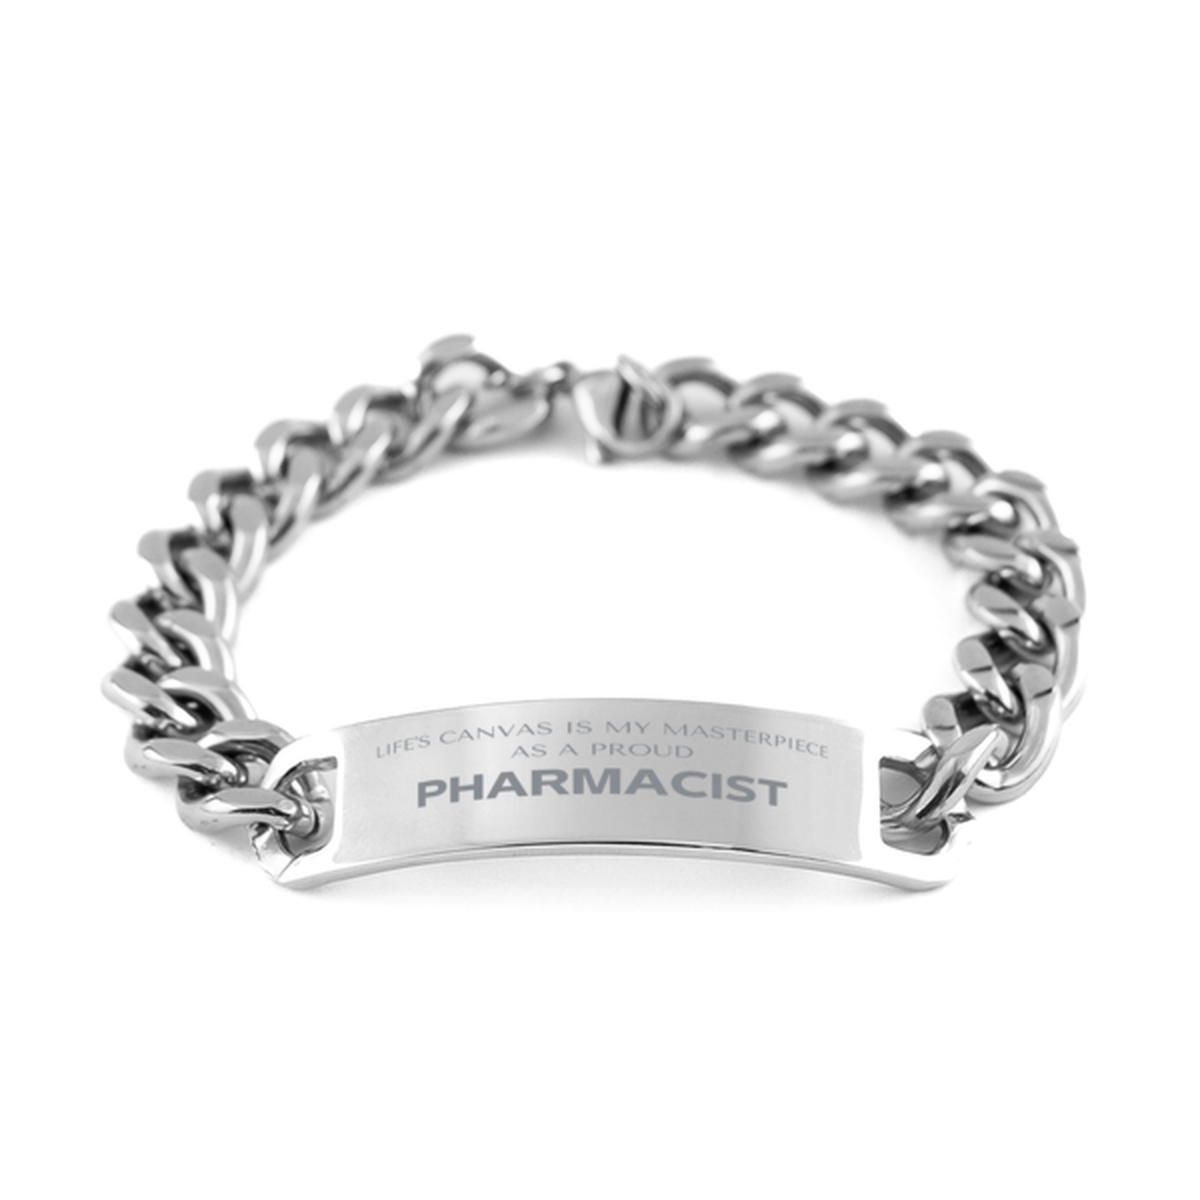 Proud Pharmacist Gifts, Life's canvas is my masterpiece, Epic Birthday Christmas Unique Cuban Chain Stainless Steel Bracelet For Pharmacist, Coworkers, Men, Women, Friends